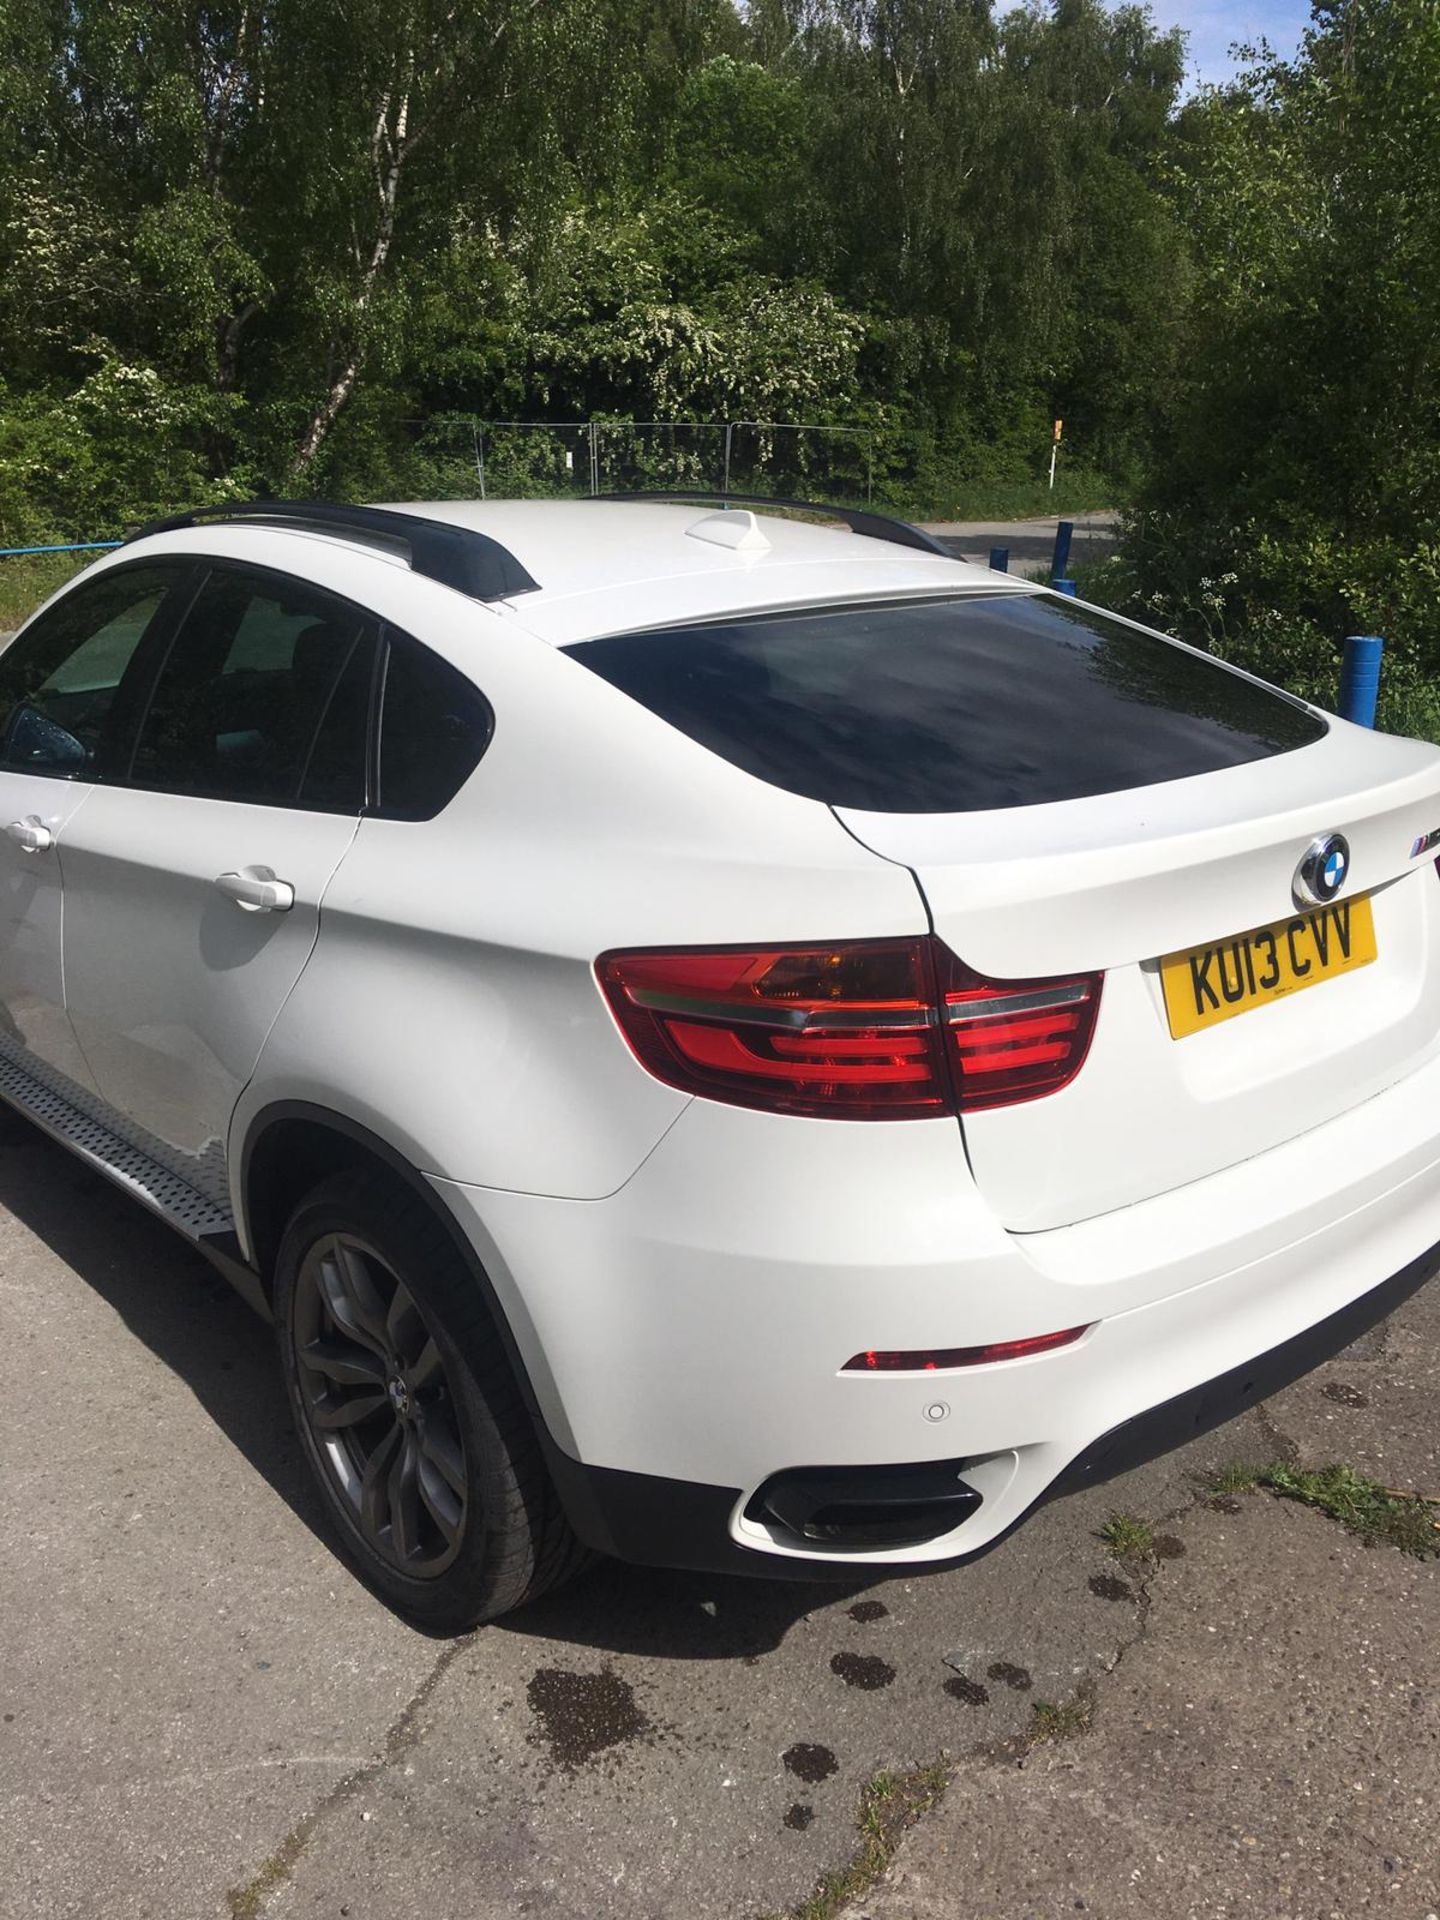 2013/13 REG BMW X6 M50D AUTOMATIC 3.0 DIESEL WHITE, SHOWING 1 FORMER KEEPER *NO VAT* - Image 5 of 36